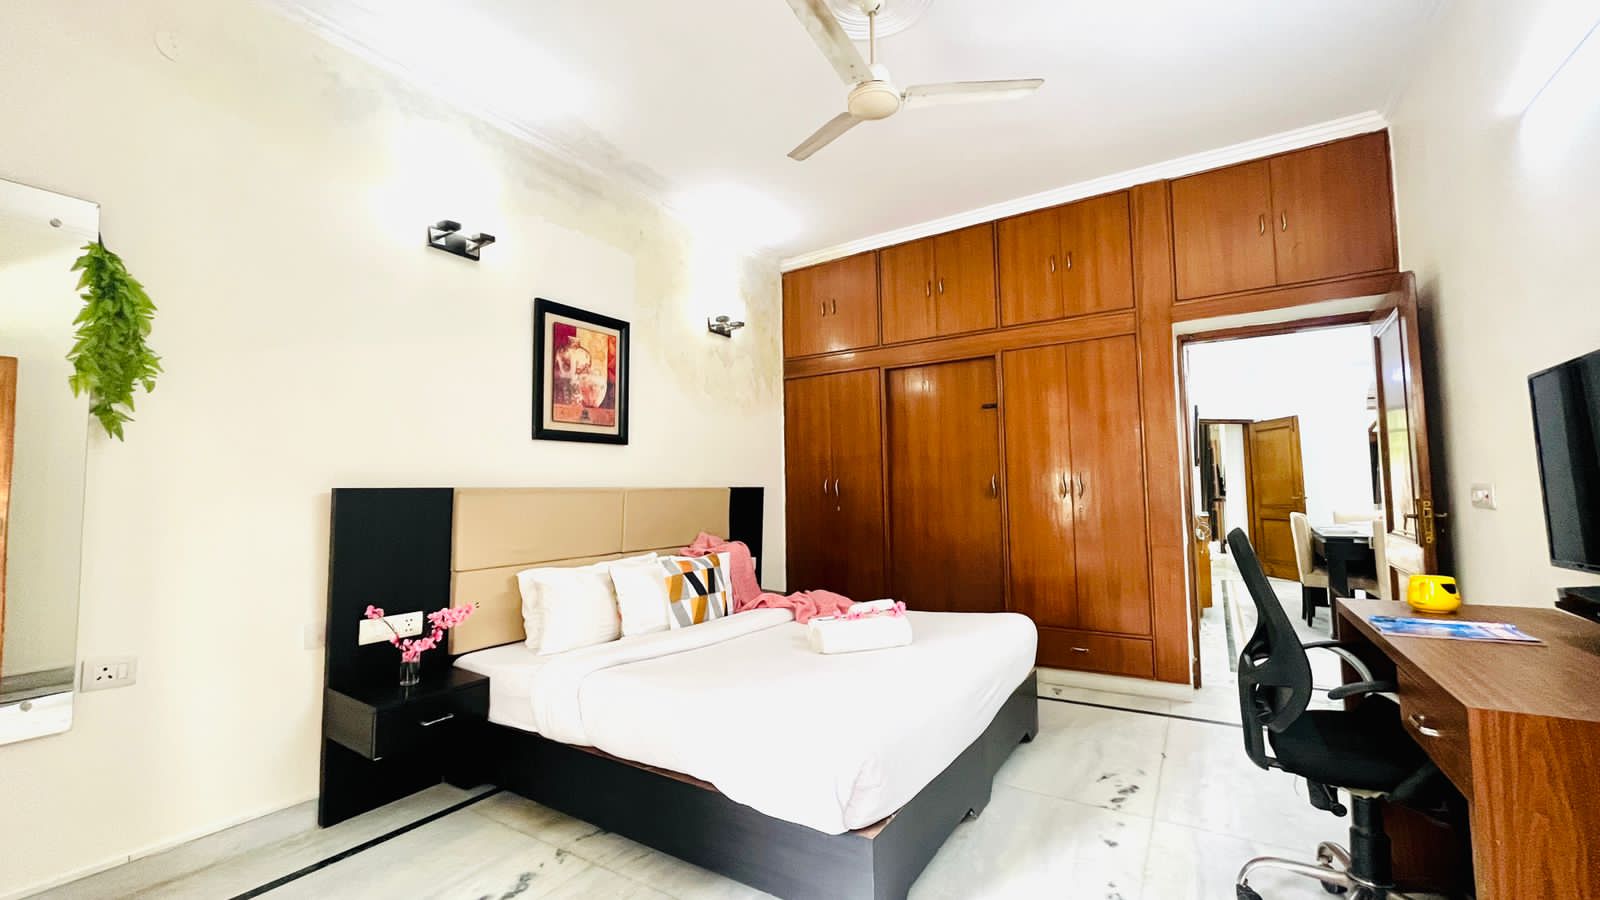 At the Service Apartments Delhi, it feels like home